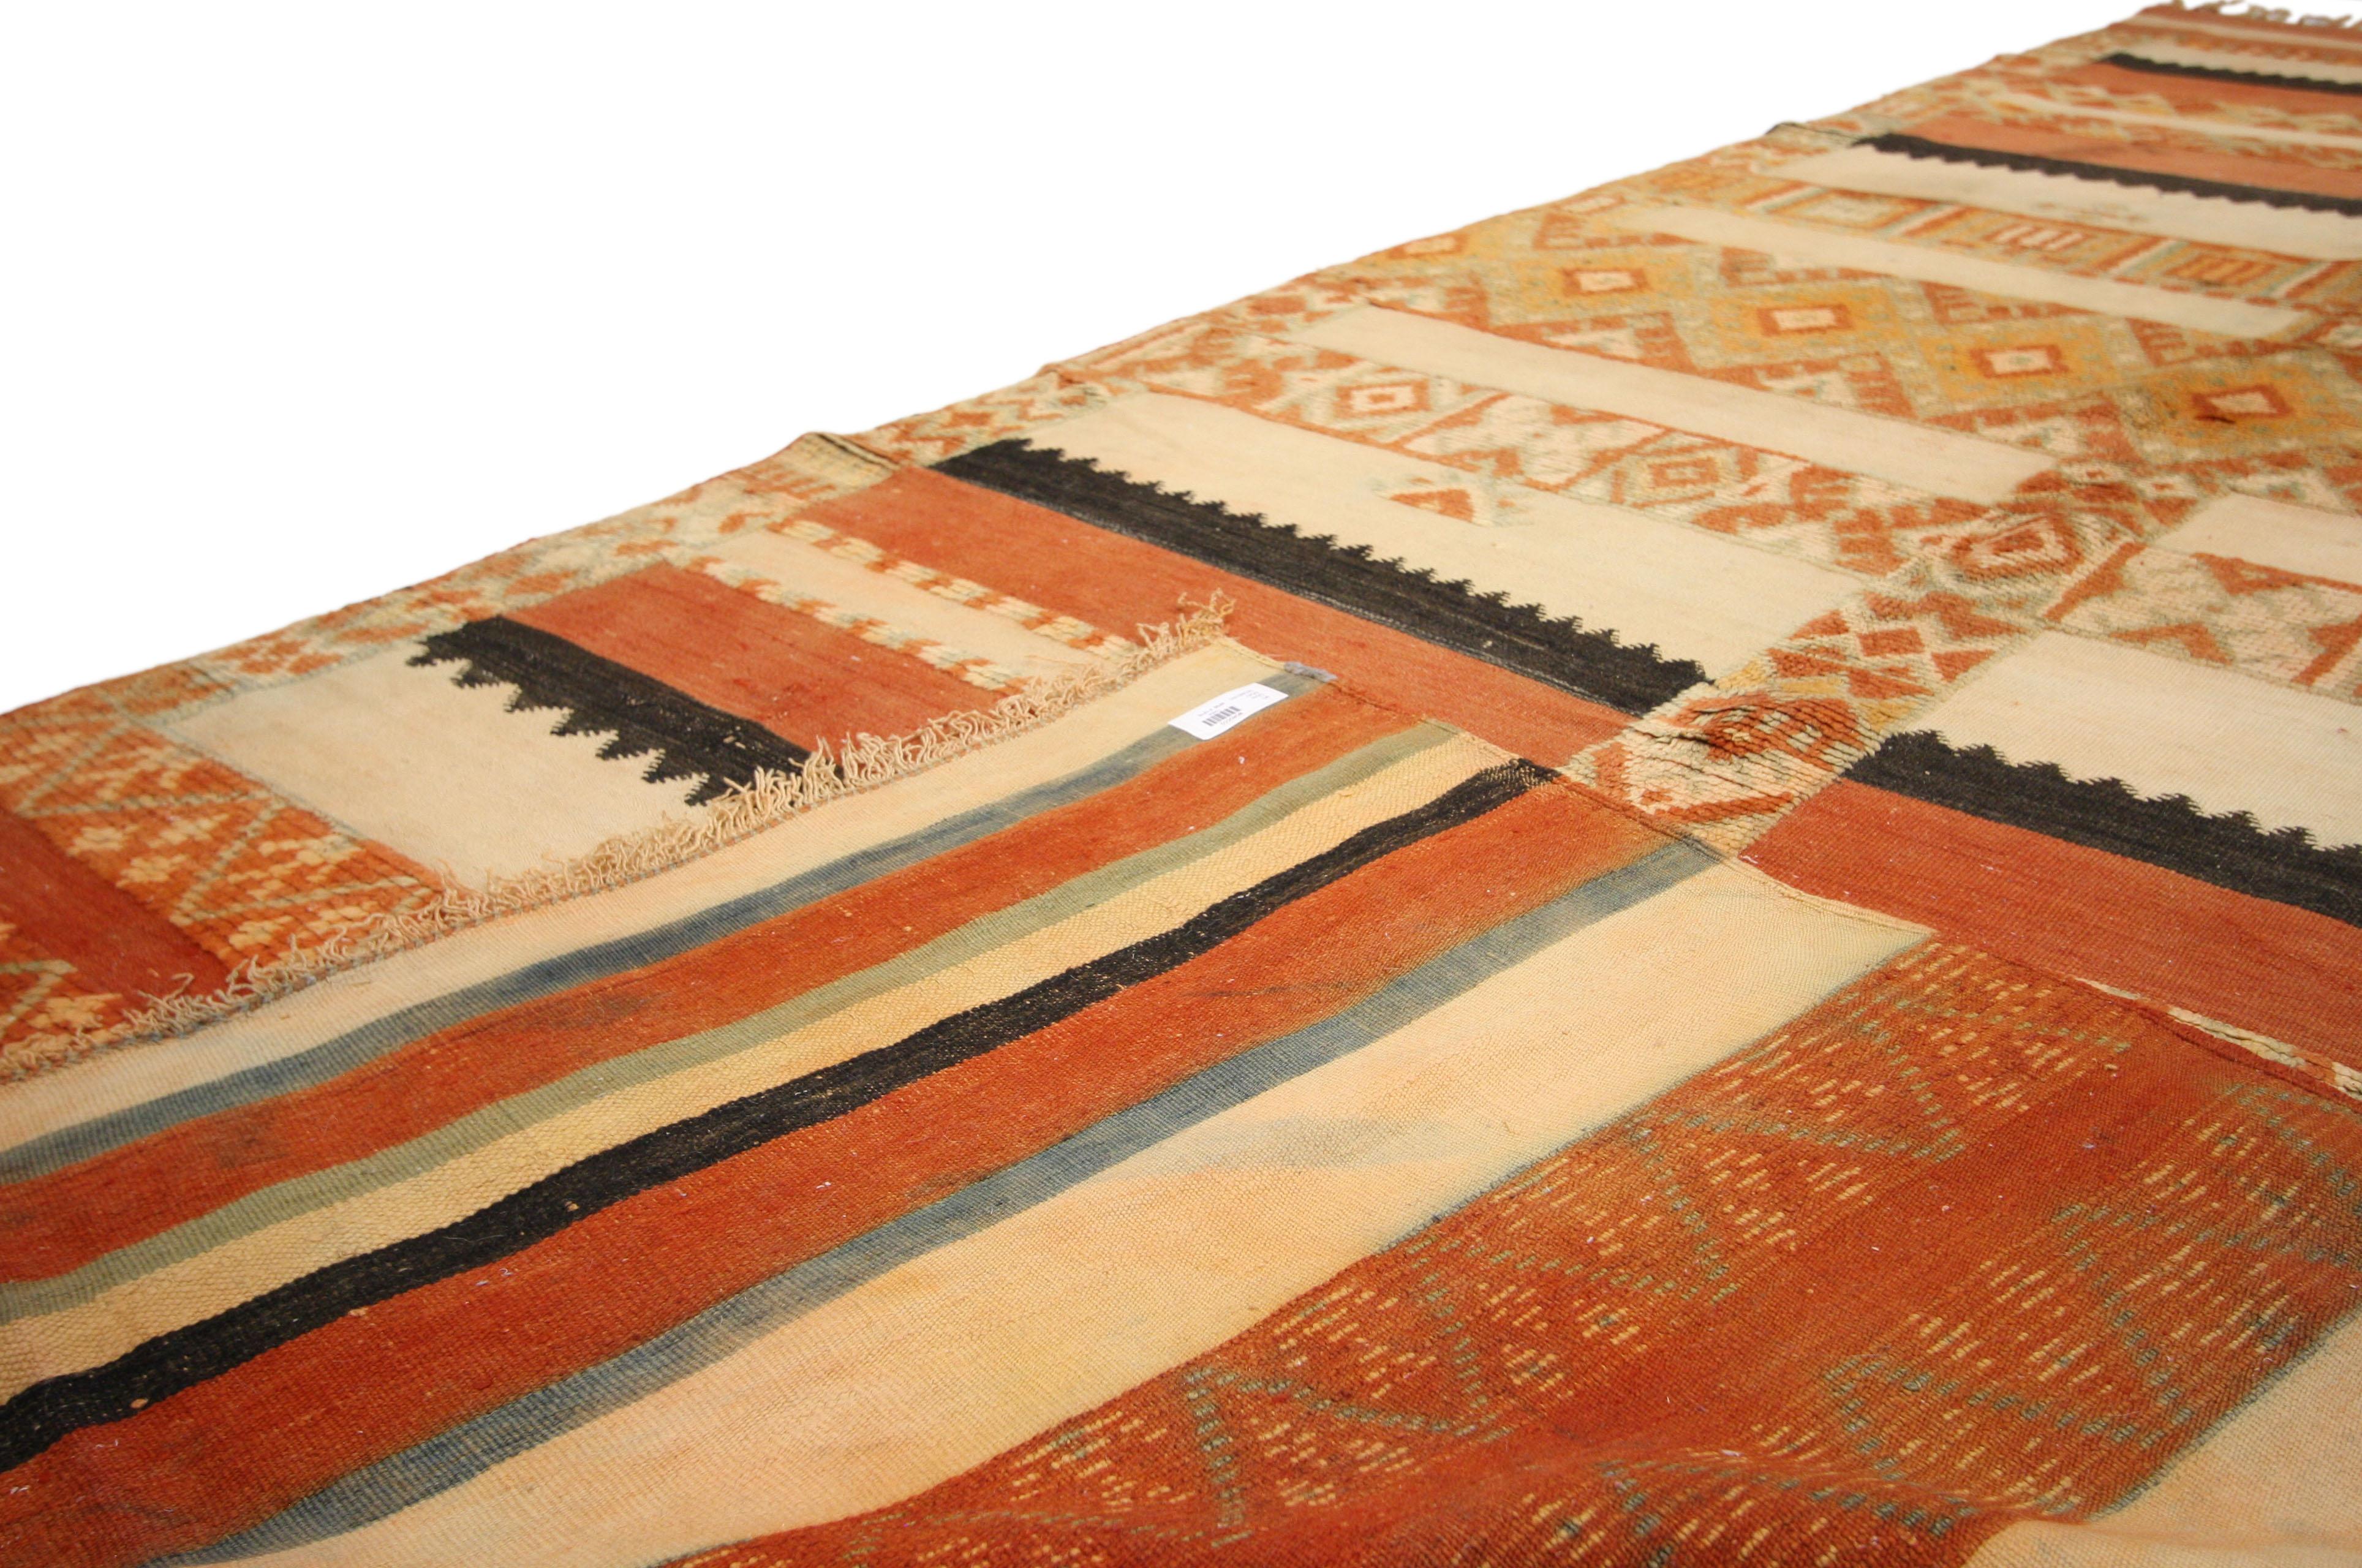 74464 Mid-Century Modern Style Vintage Moroccan Striped Kilim Rug with High-Low Pile. A warm and inviting design, this vintage Moroccan striped Kilim rug with Mid-Century Modern style features a series of bands and an array of symbolic tribal